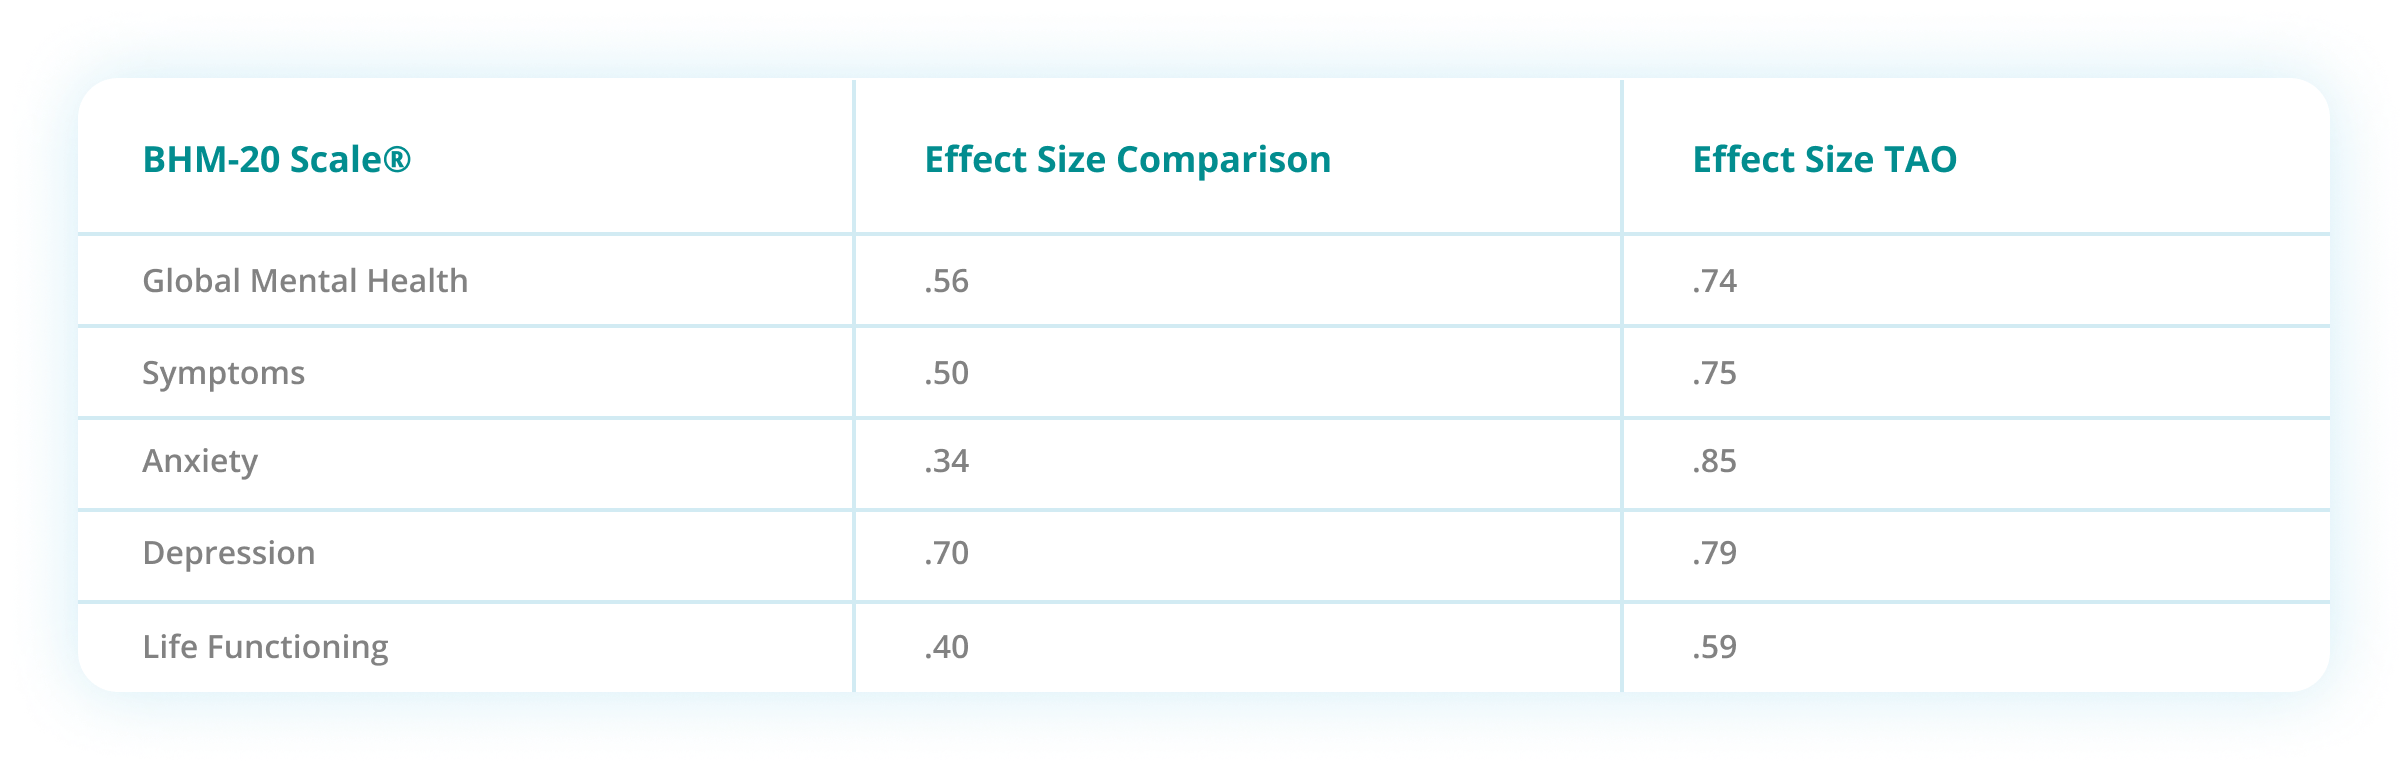 Comparison Study table grid. Column one BHM20 Scale Column two Effect Size Comparison Column three Effect Size TAO. Row one Gobal Mental Health Cell 1 .56 Cell 2 .74. Row 2 symptoms cell 1 .50 cell 2 .75. Row 3 anxiety cell 1 .50 cell 2 .75. Row 4 depression cell 1 .70 cell 2 .70. Row 5 Life functioning cell 1 .40 cell 2 .59